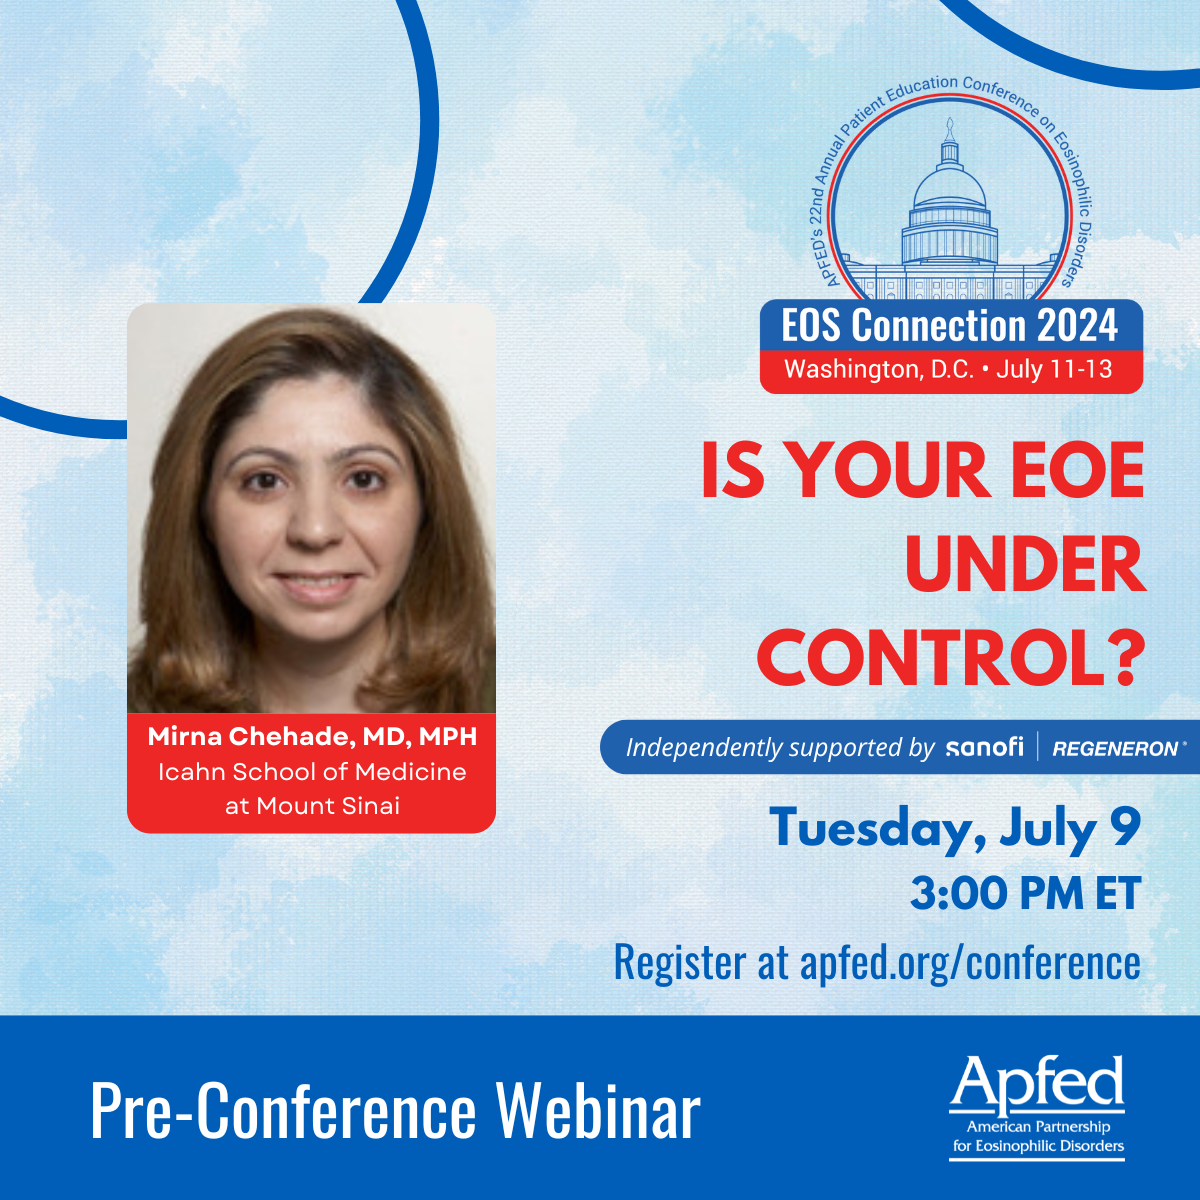 Pre-conference webinar featuring Dr. Chehade